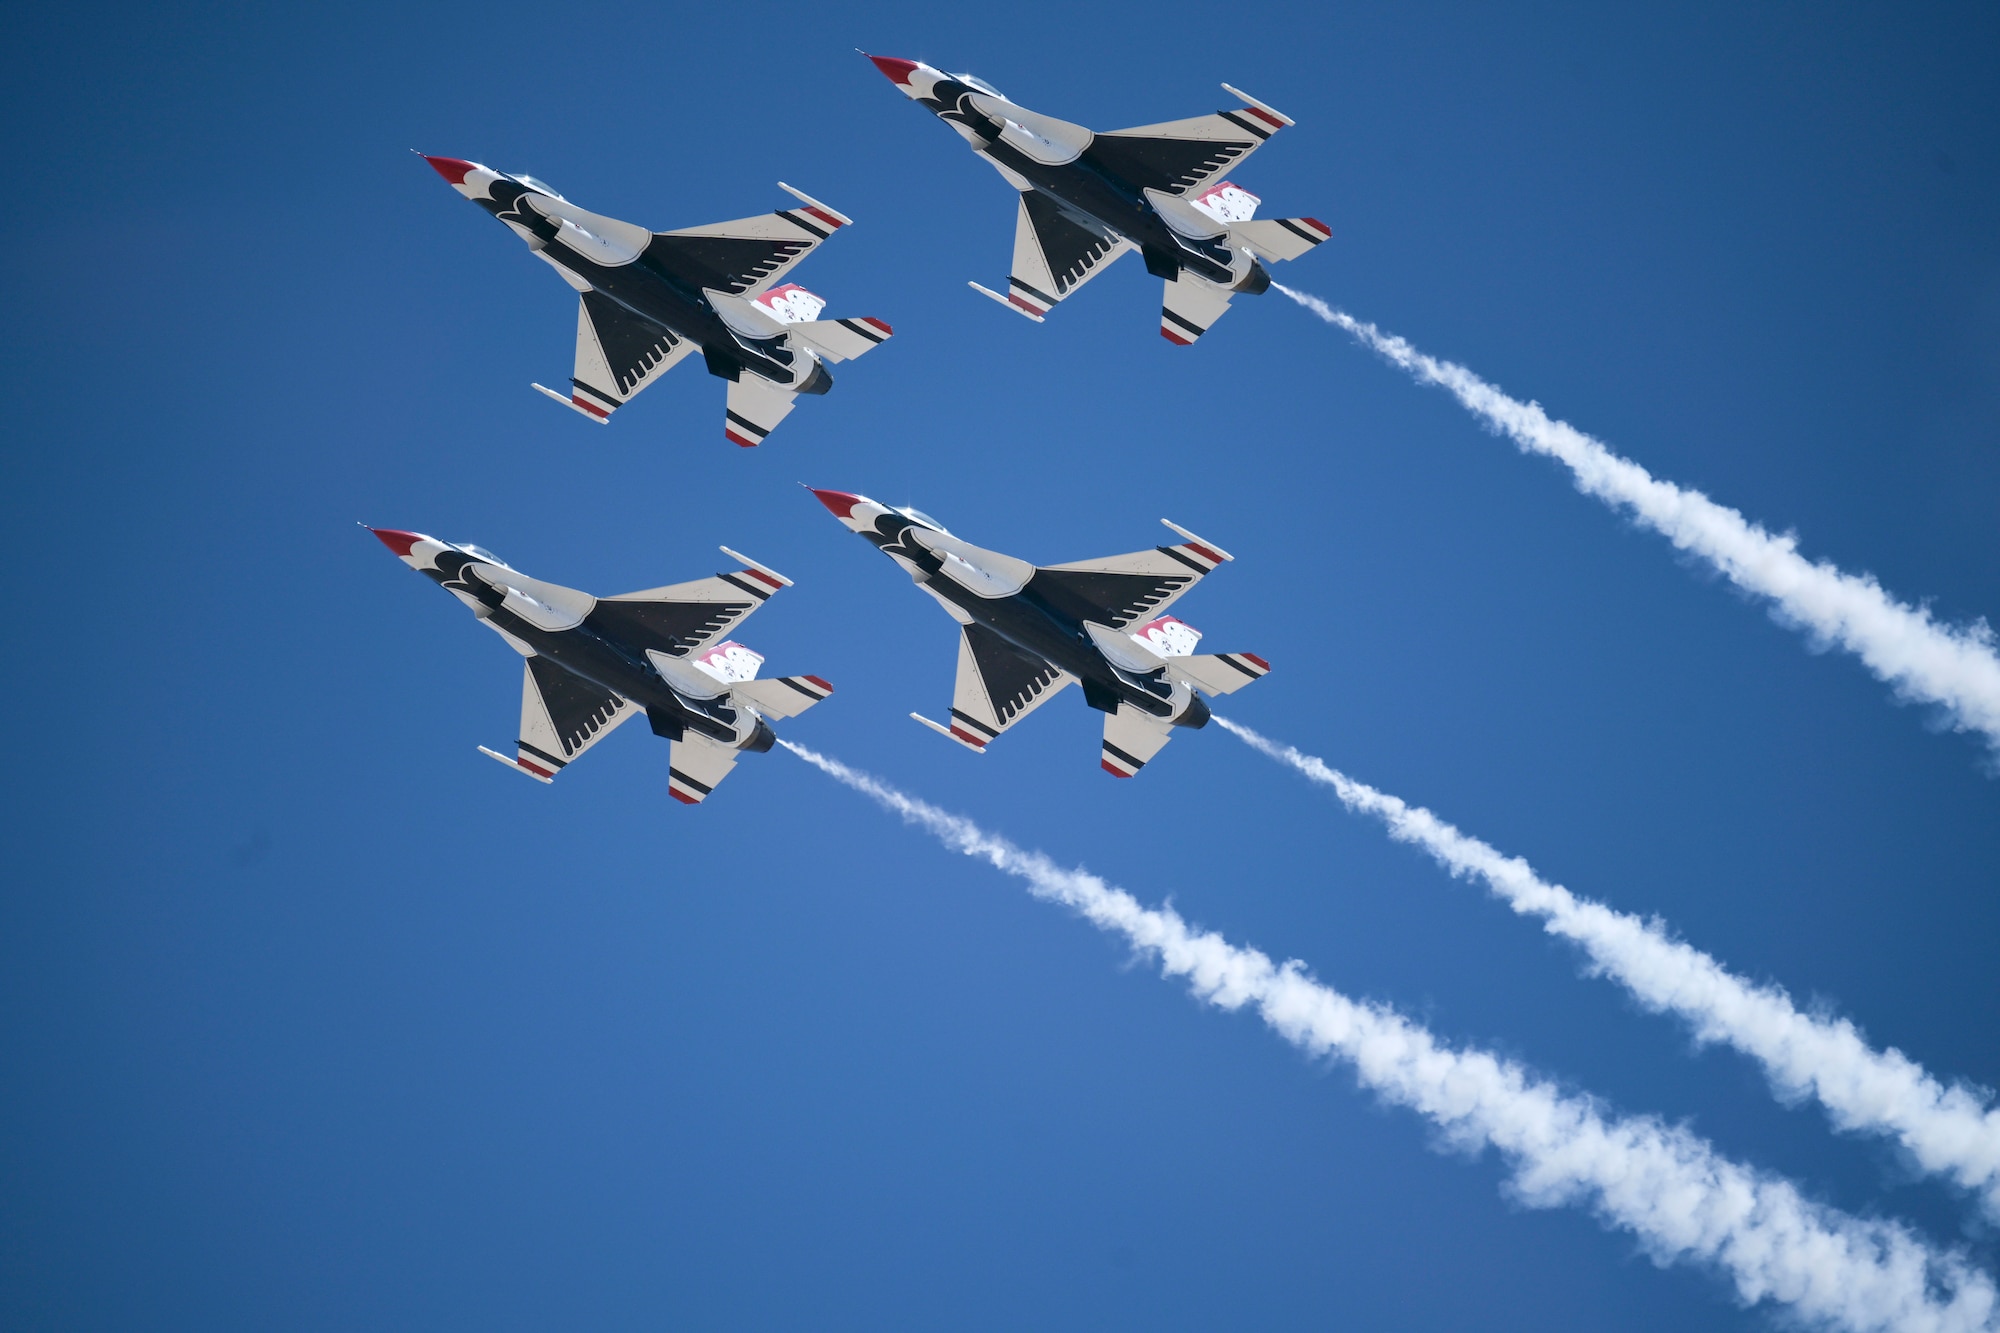 Four F-16 Fighting Falcons from the U.S. Air Force demonstration squadron, known as the “Thunderbirds,” take flight in a rehearsal for the 2022 Holloman Legacy of Liberty Air Show and Open House, May 6, 2022, on Holloman Air Force Base, New Mexico. The demonstration team was activated at Luke Air Force Base, Arizona, in 1953. (U.S. Air Force photo by Airman 1st Class Antonio Salfran)